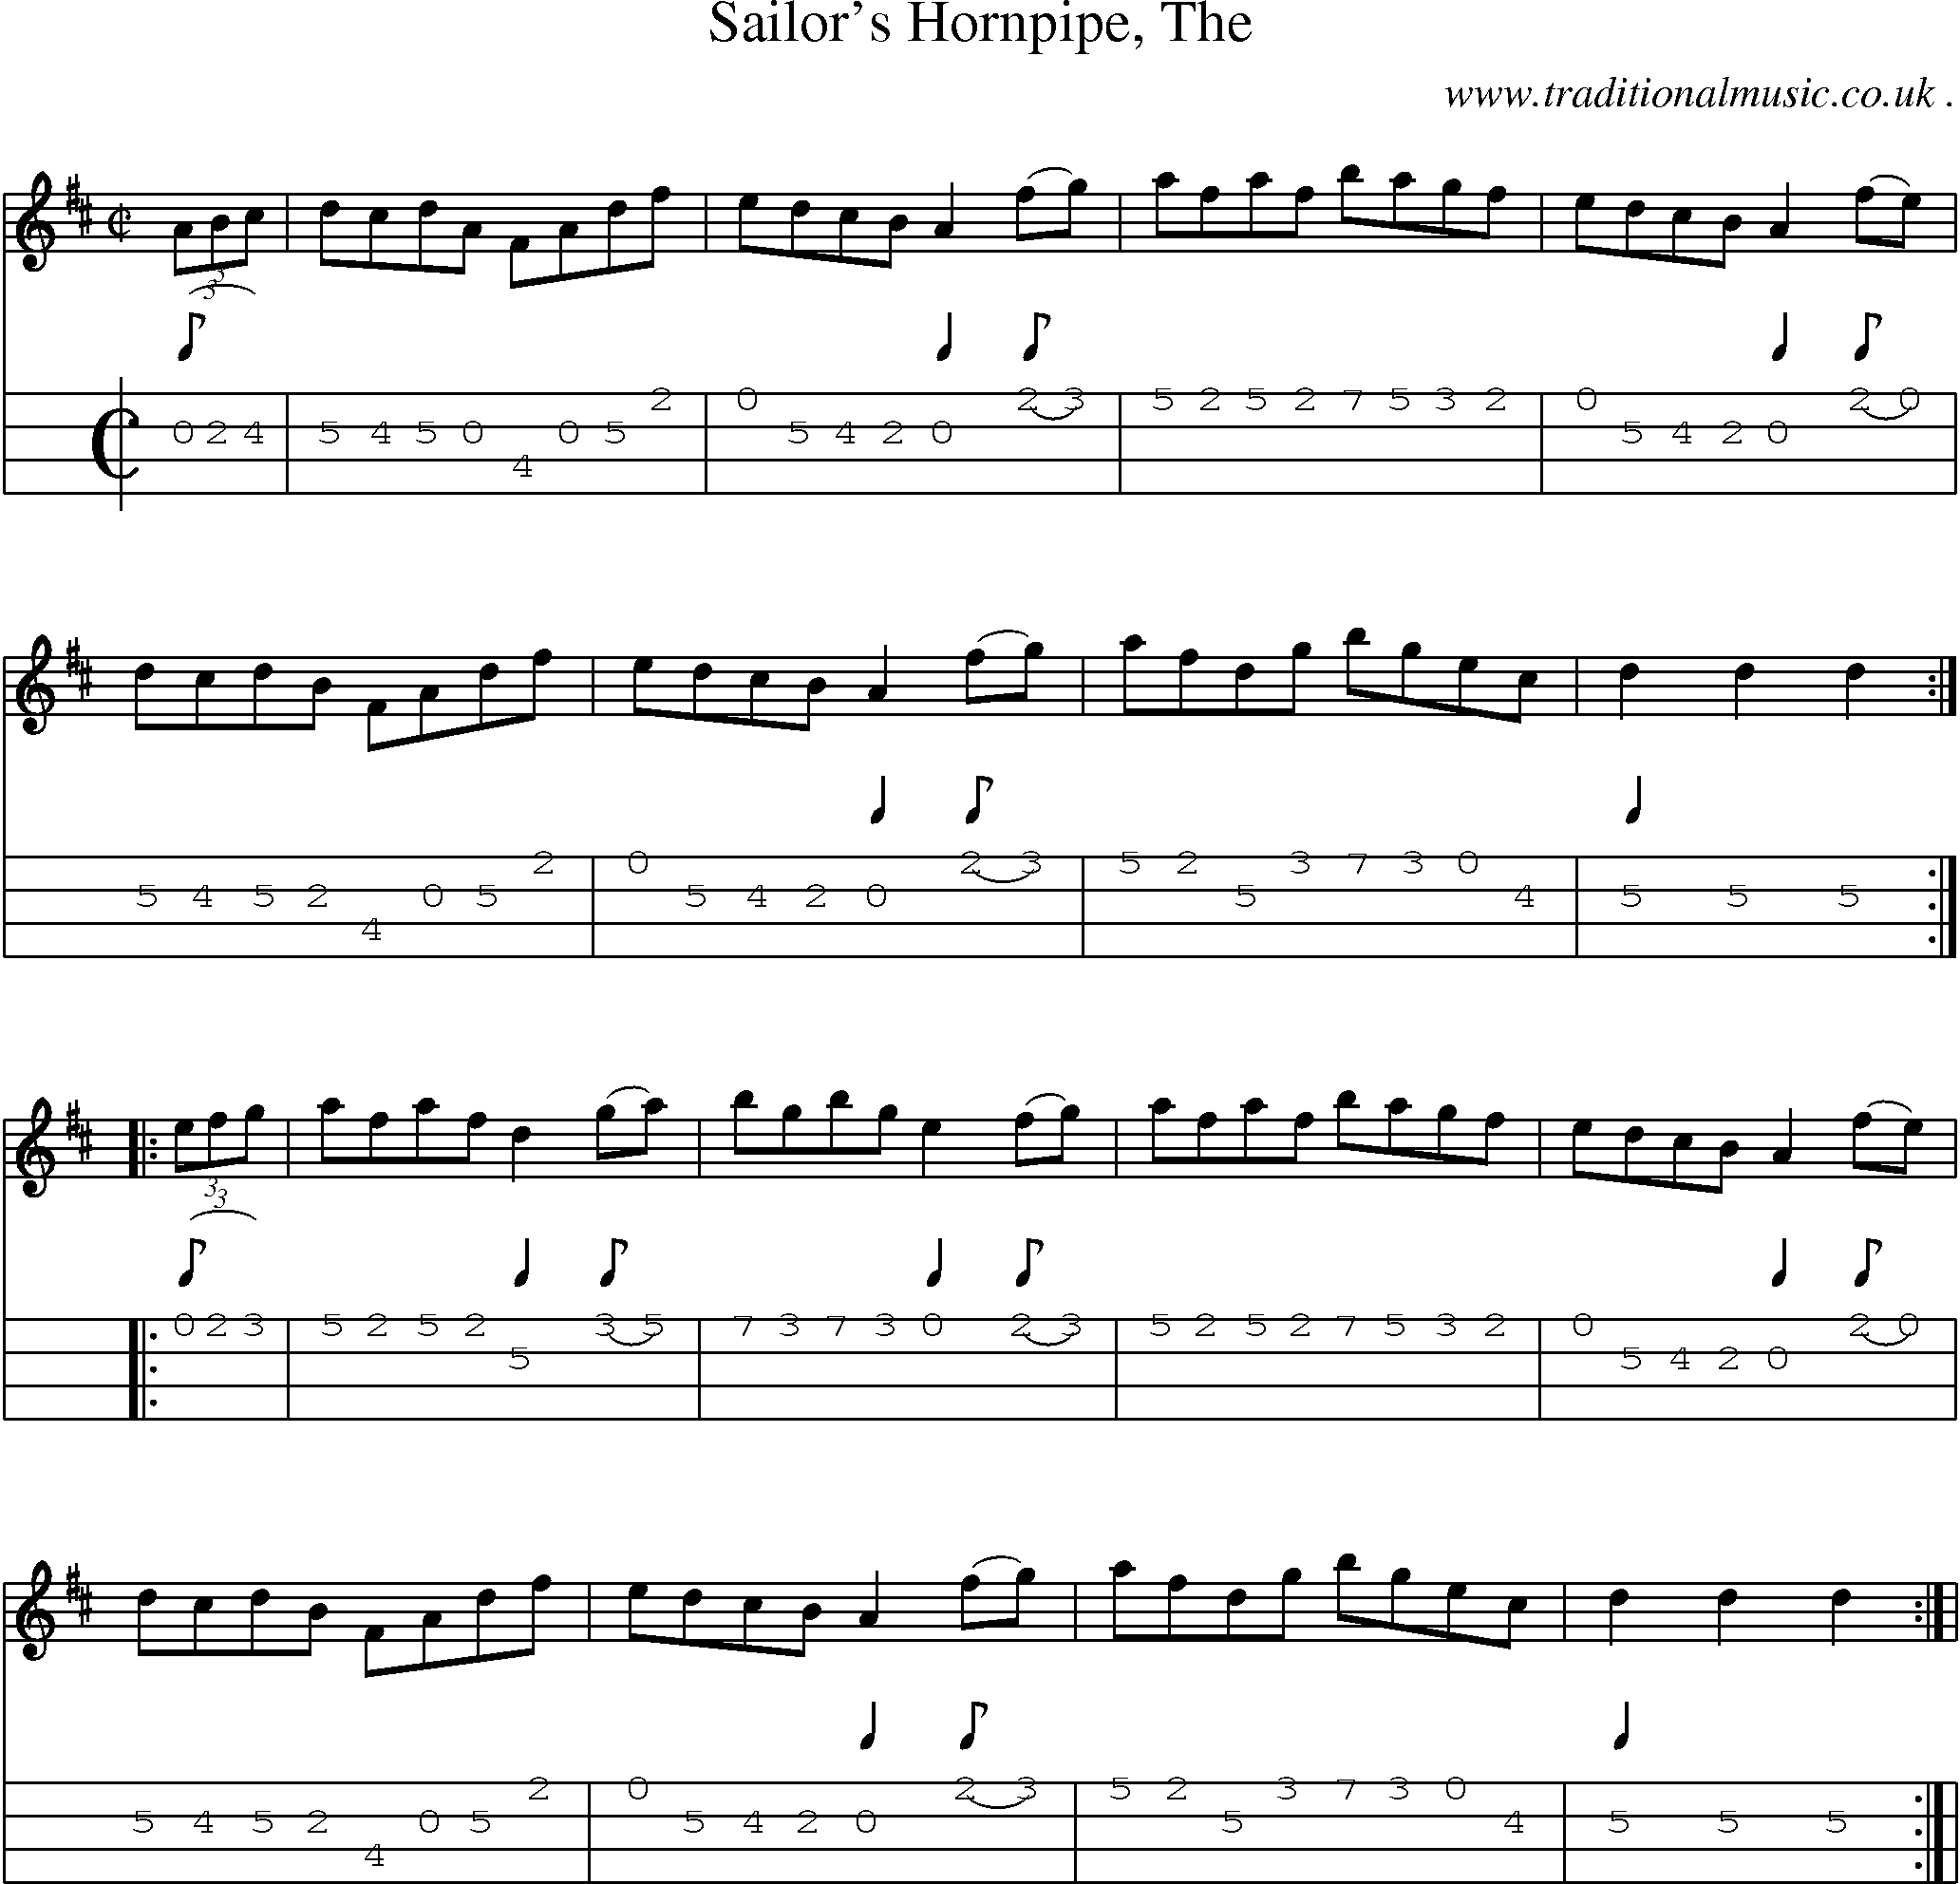 Music Score and Guitar Tabs for Sailors Hornpipe The